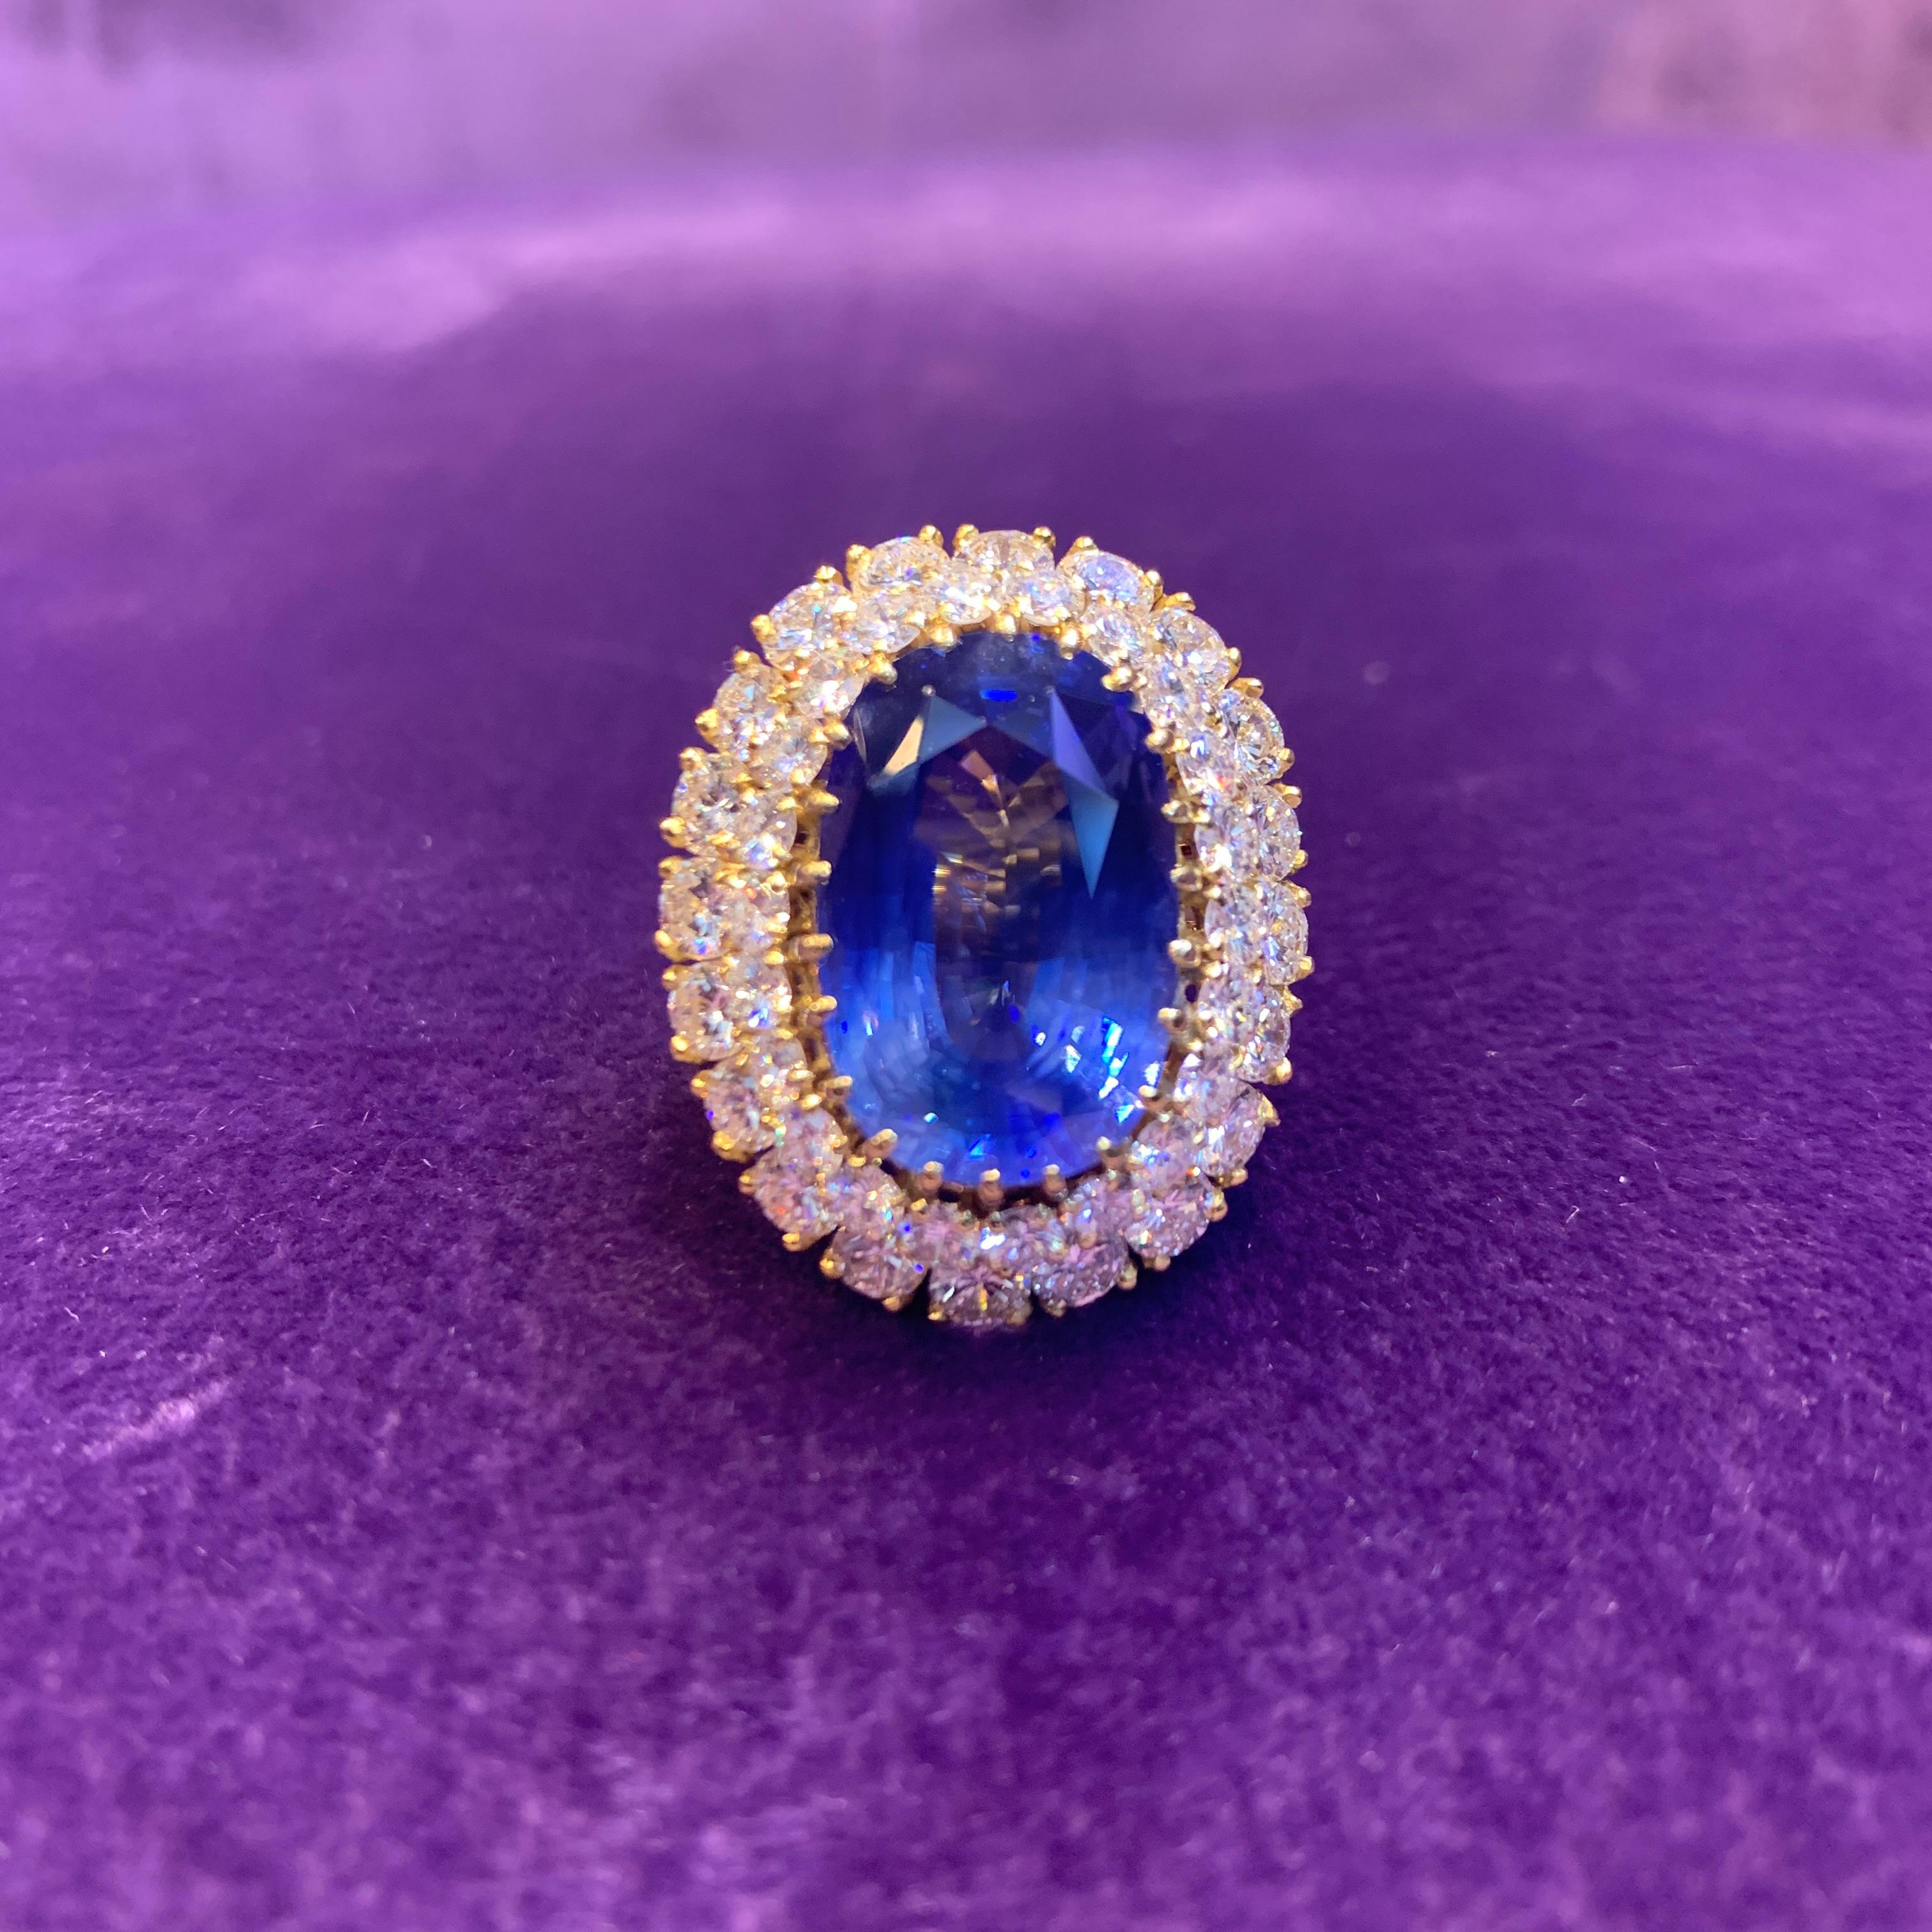 Van Cleef & Arpels Certified Sapphire & Diamond Ring In Excellent Condition For Sale In New York, NY